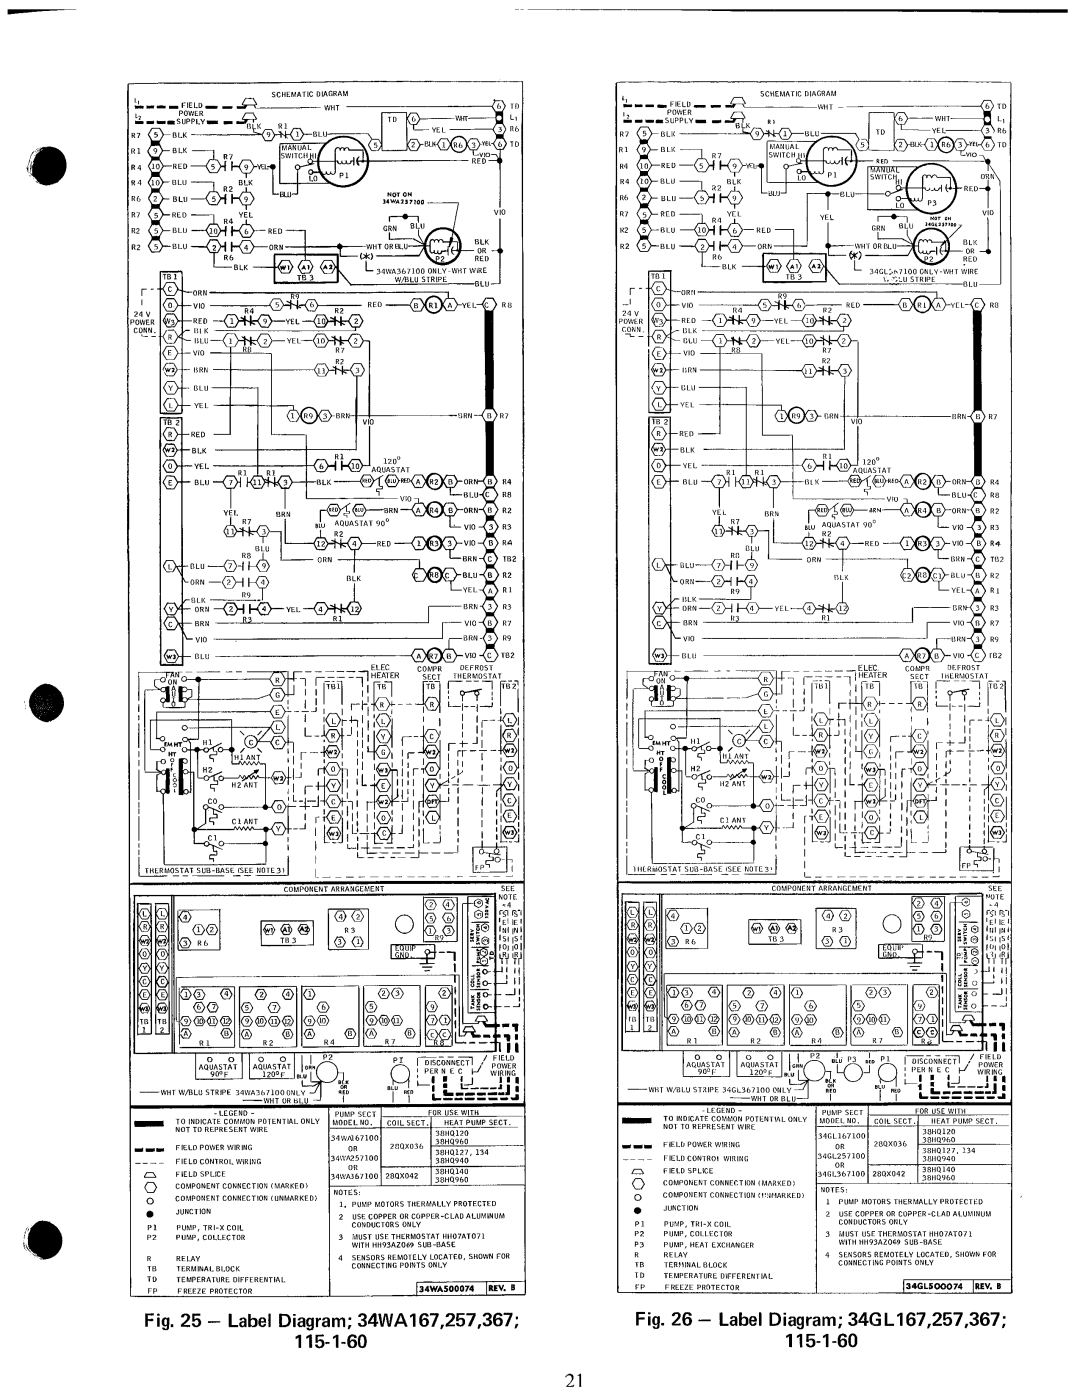 Carrier 28QX manual 